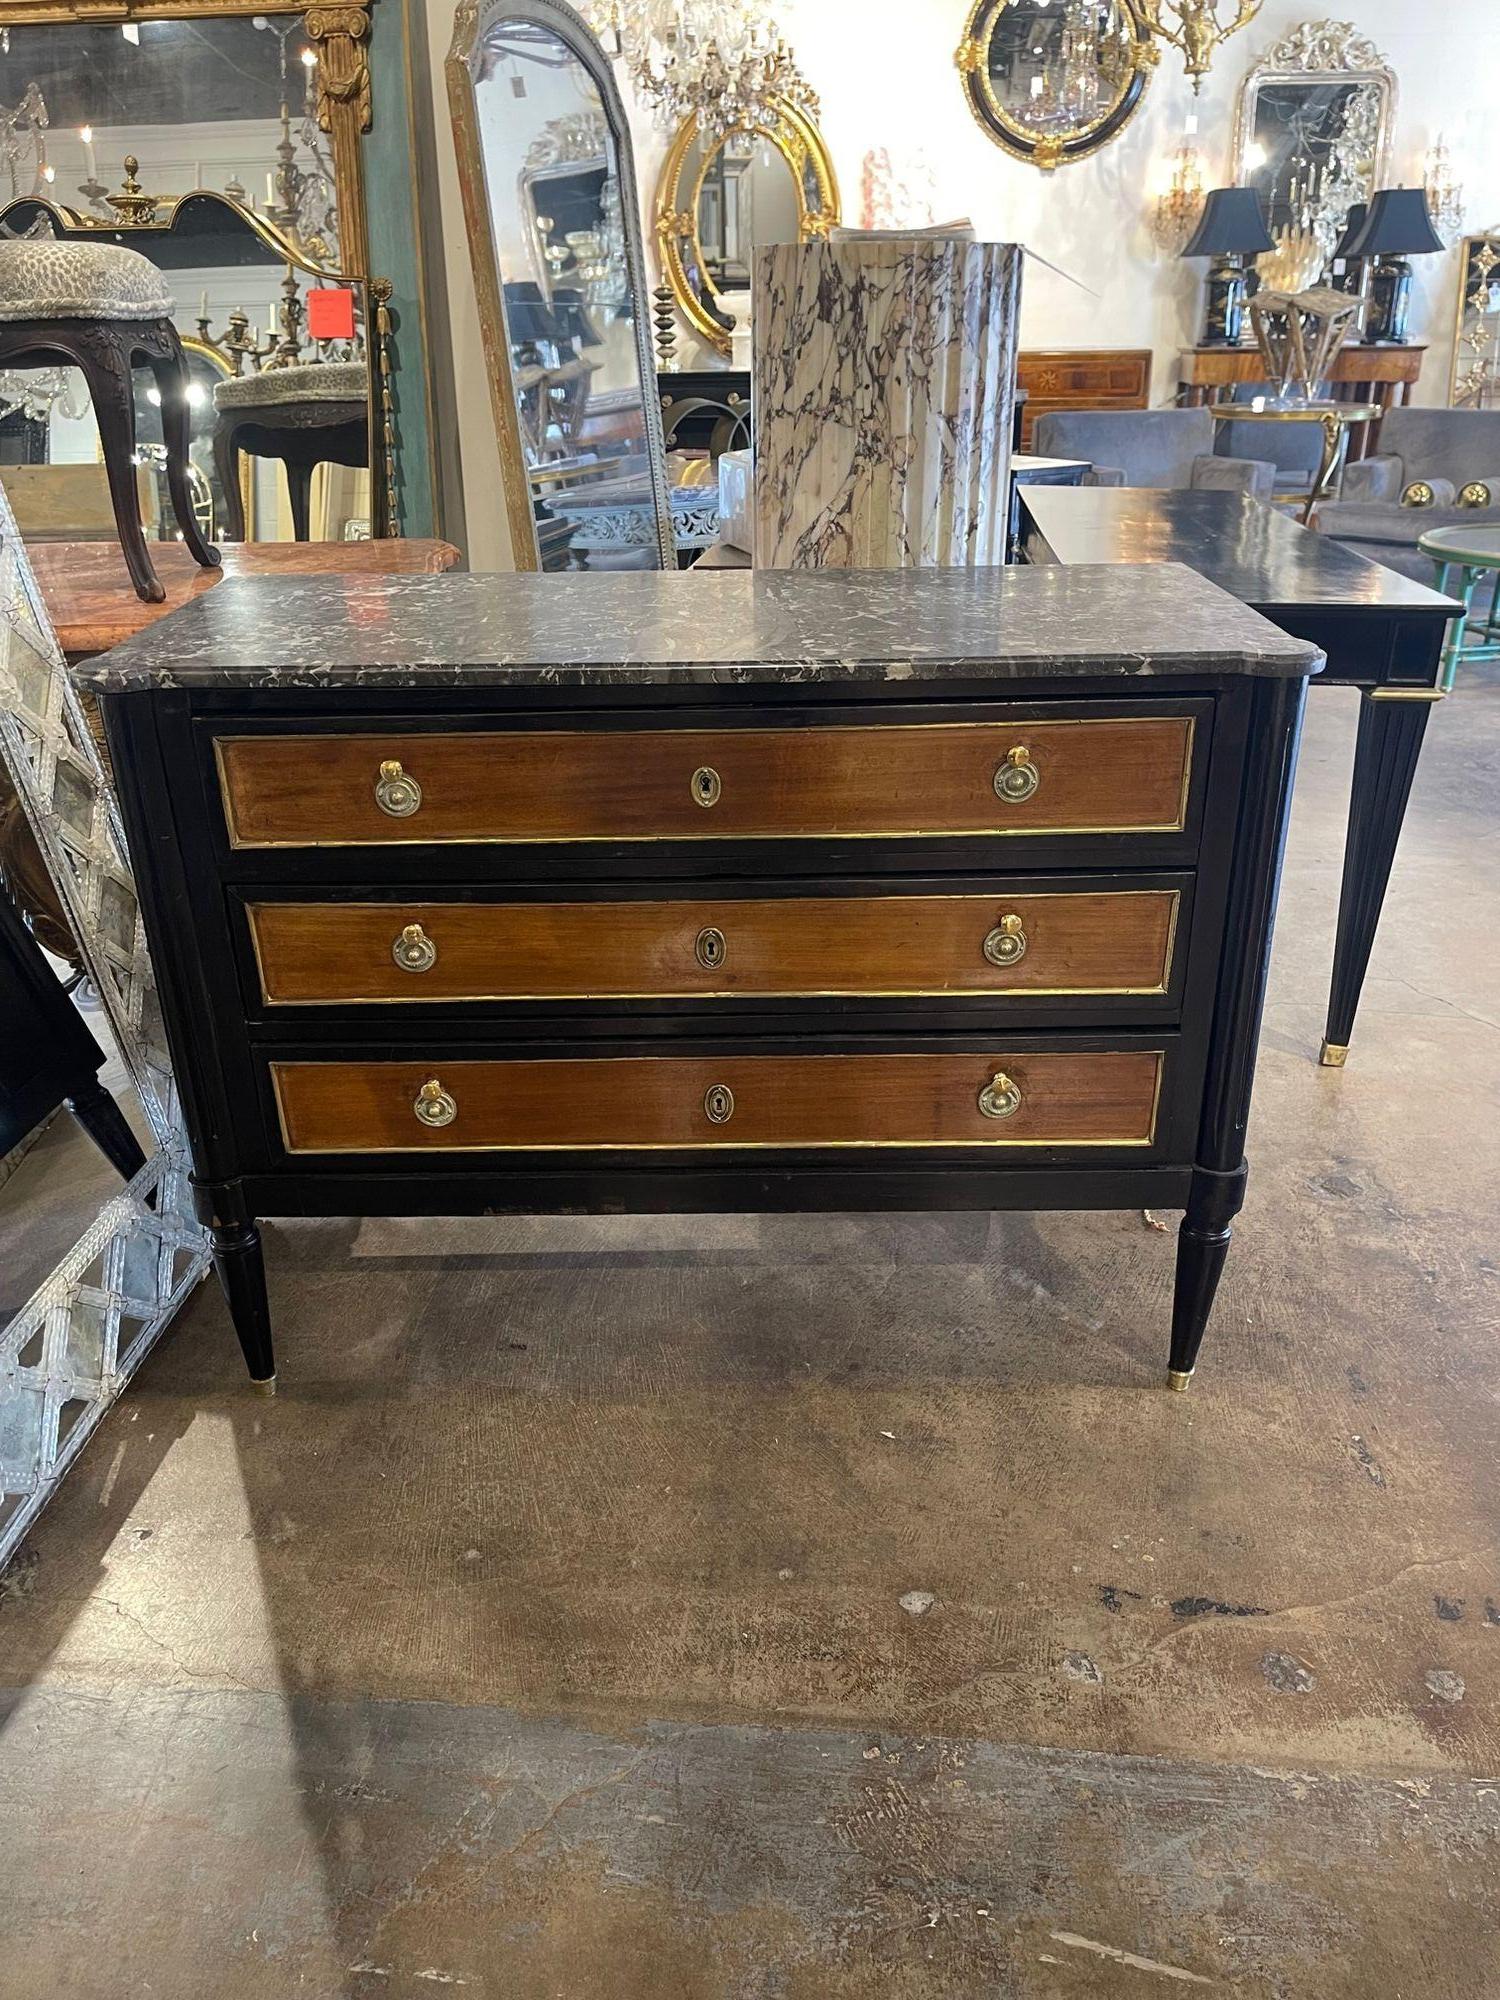 Very fine vintage French Jansen walnut and black lacquered Louis XVI style commode. This piece also has a beautiful marble top and lovely hardware. A true classic that is sure to impress!!